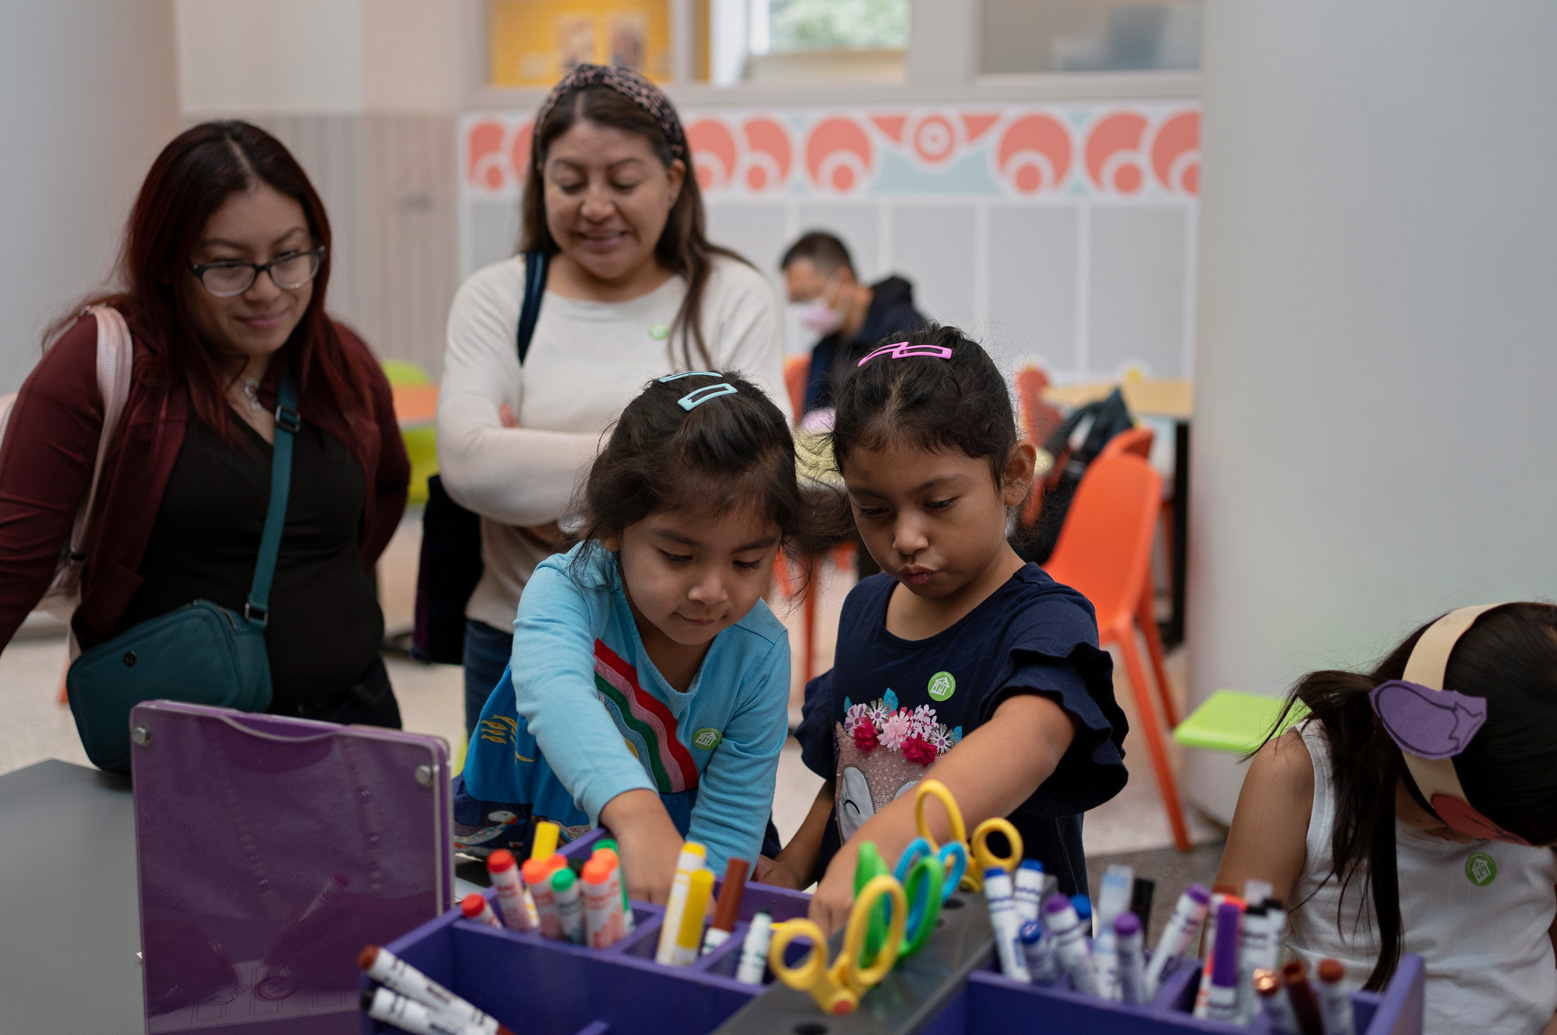 Romeli Perez, 3, left, and Leilani Perez, 7, make crafts during the Indigenous People's Day commemoration at the Children’s Museum Houston